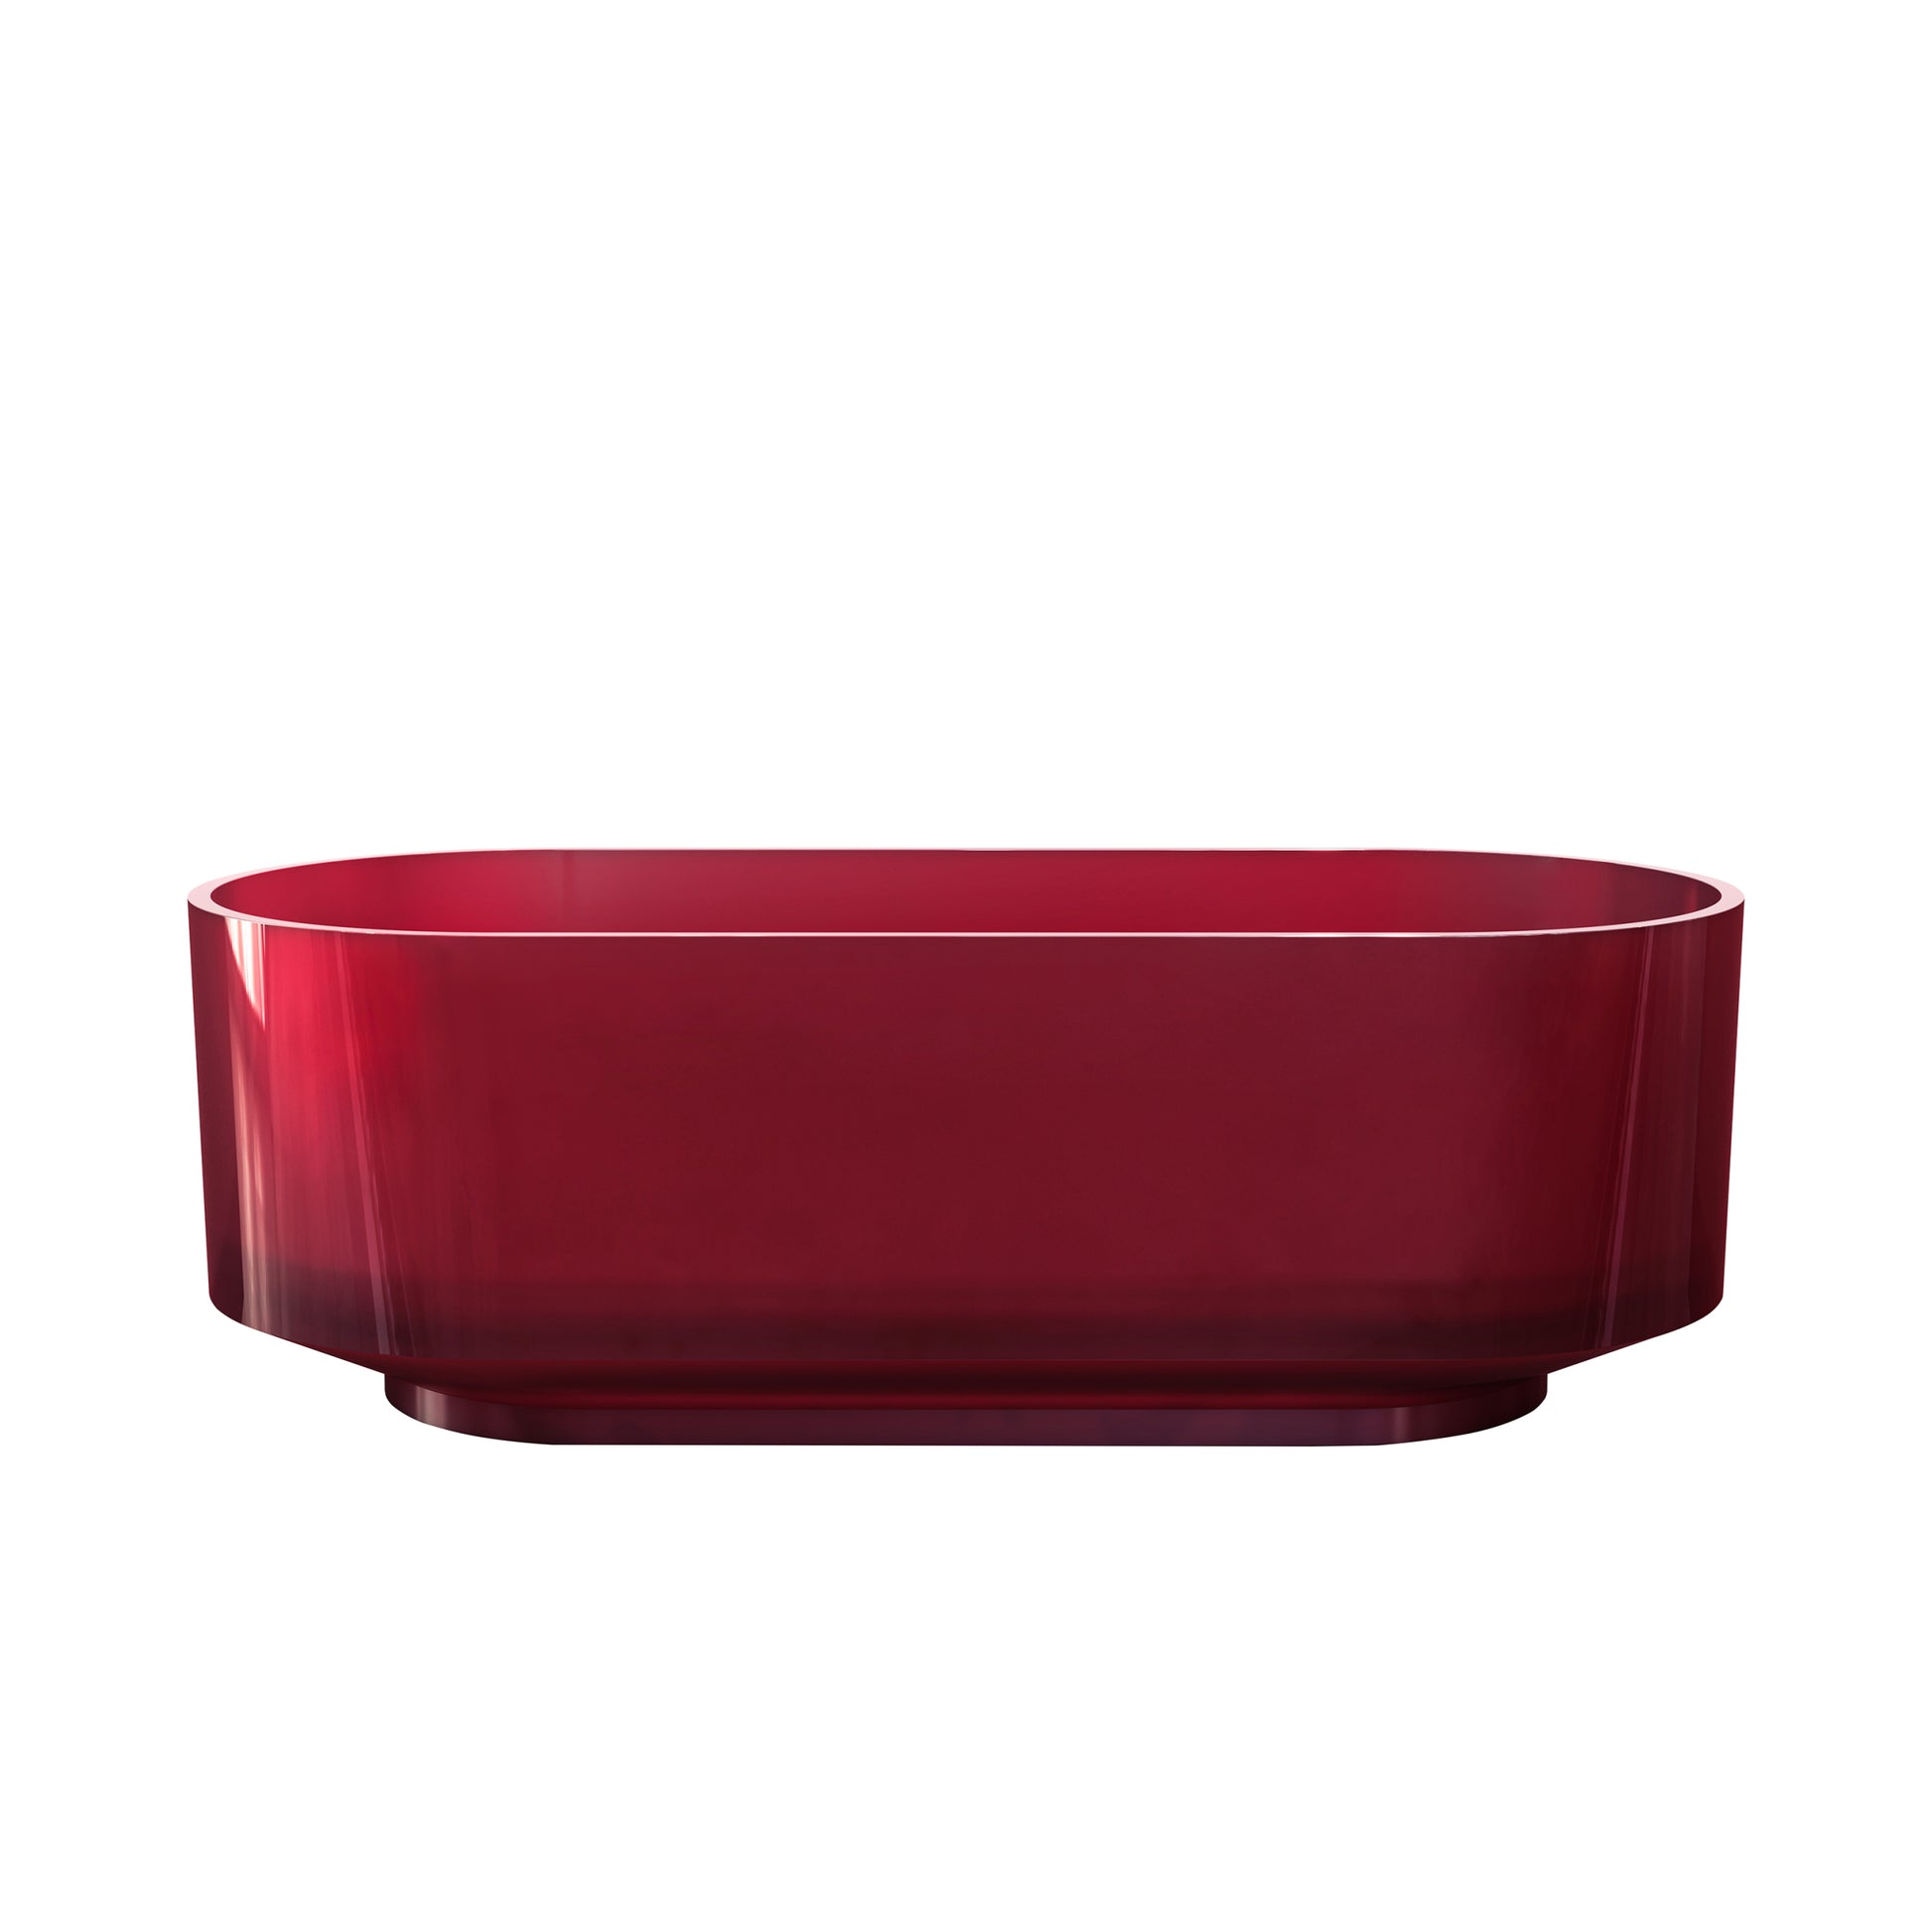 67 inch Clear cherry red solid surface bathtub